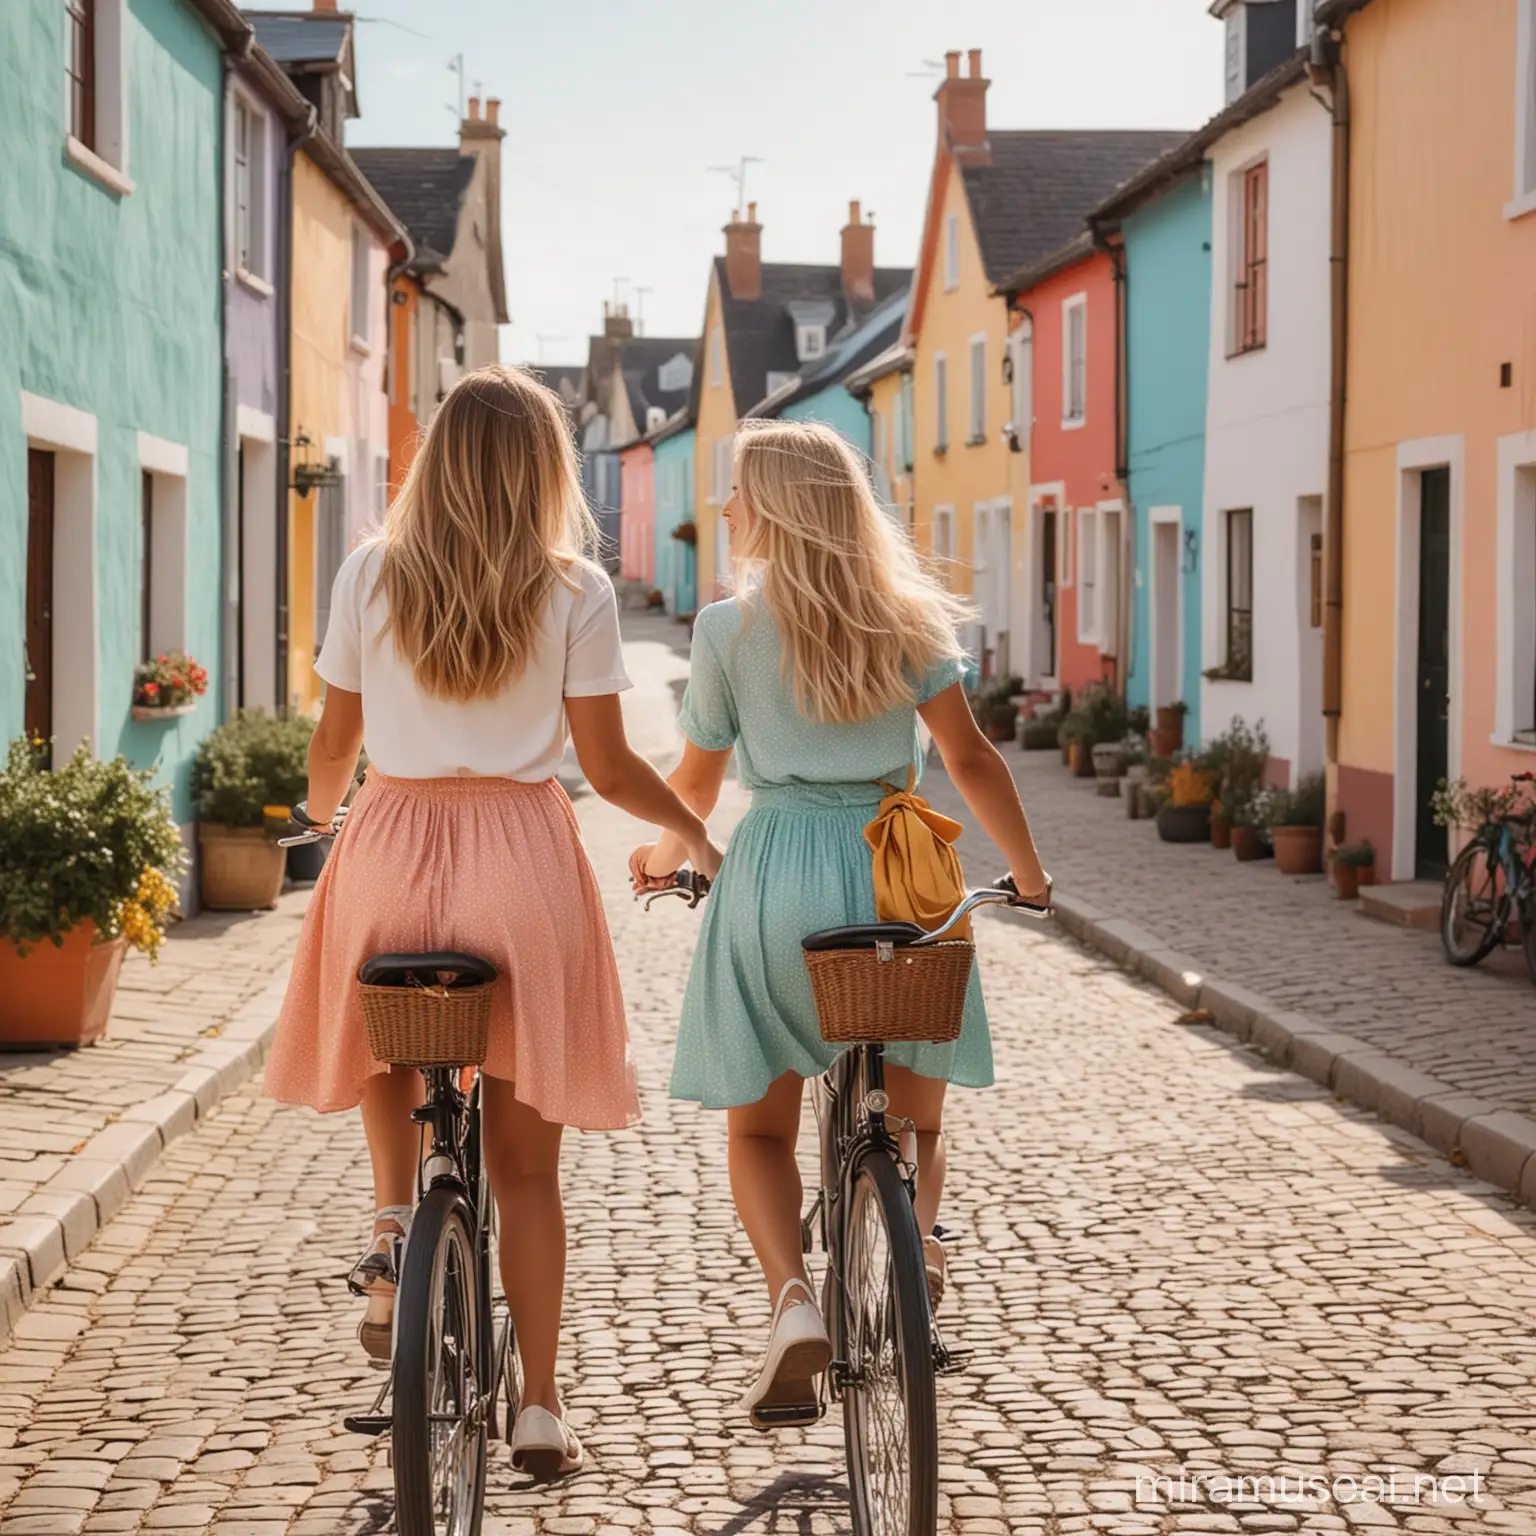 Blonde OmbreHaired Girls Enjoying Bicycle Ride Through Colorful Village Street